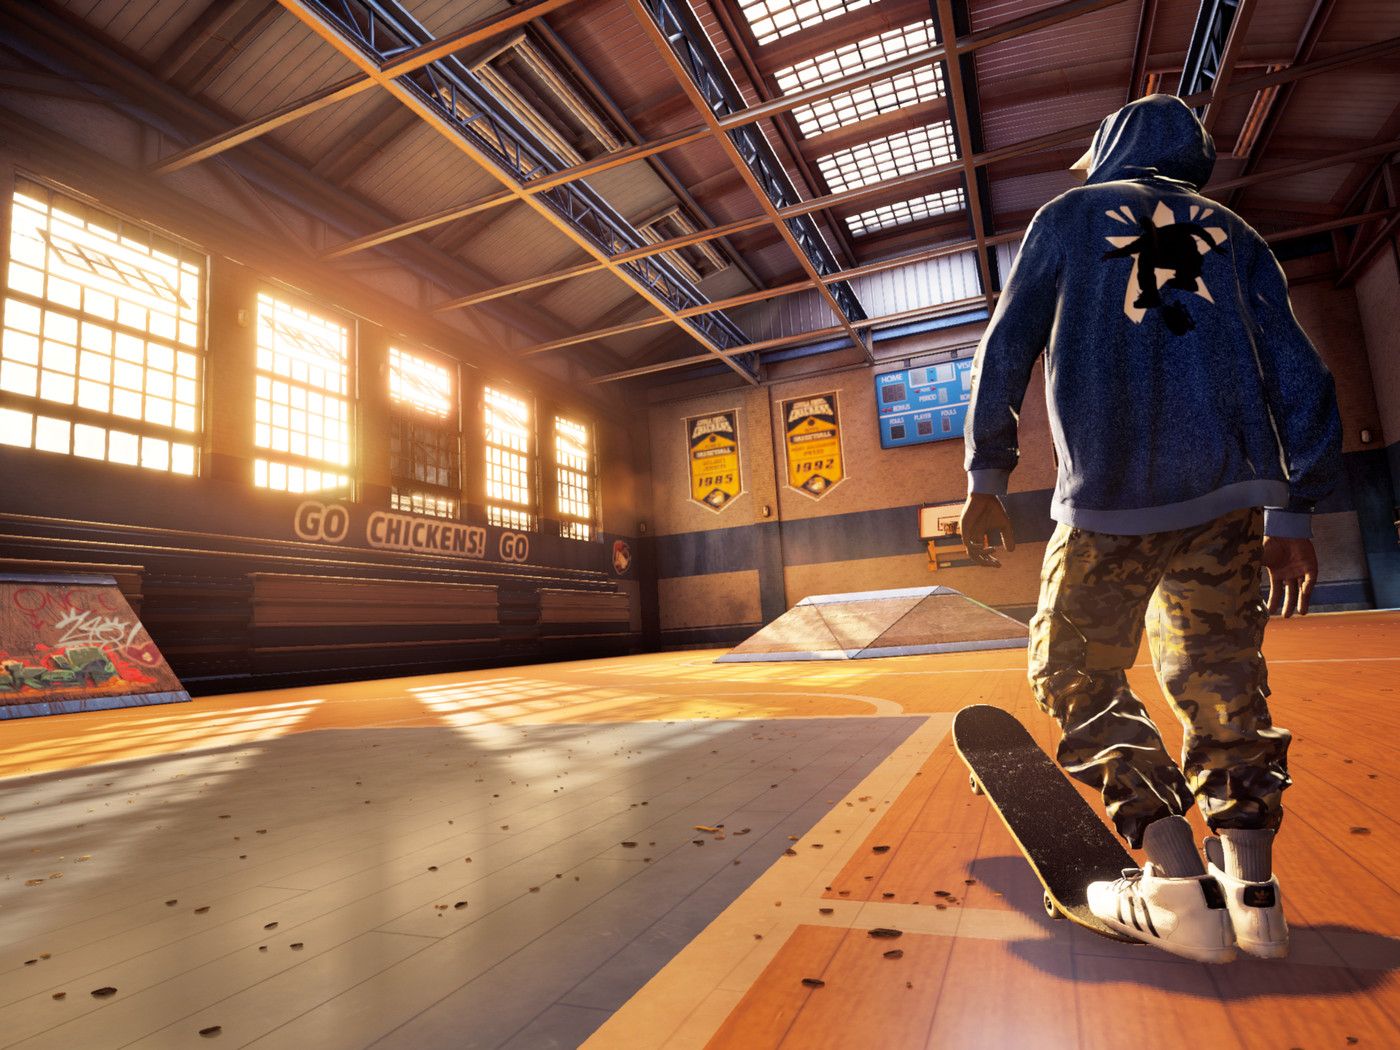 Tony Hawk's Pro Skater 1 and 2 are being remastered for PS Xbox